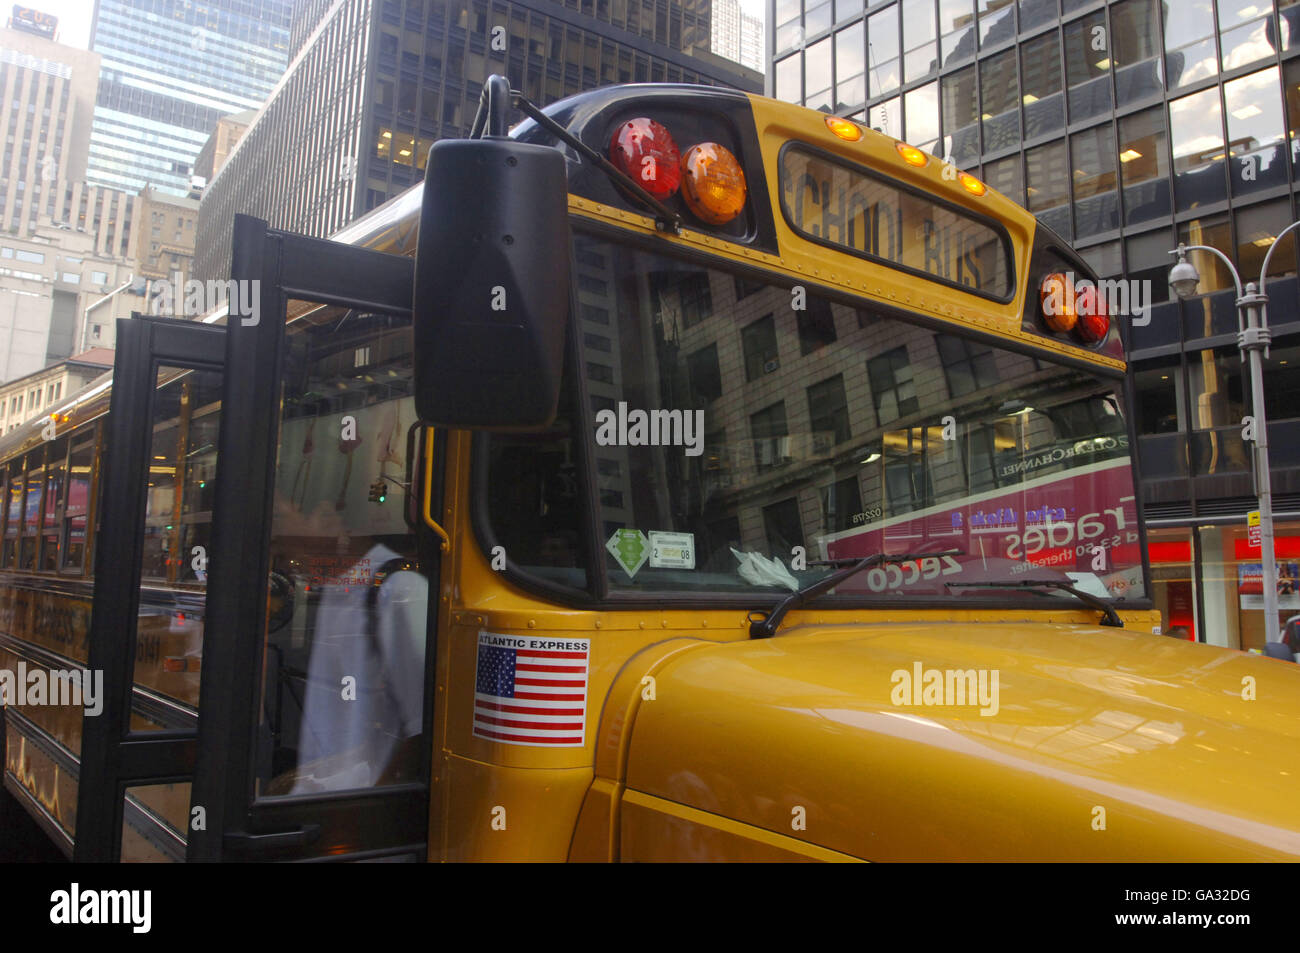 An American School Bus stops to let students out, Midtown, New York. Stock Photo